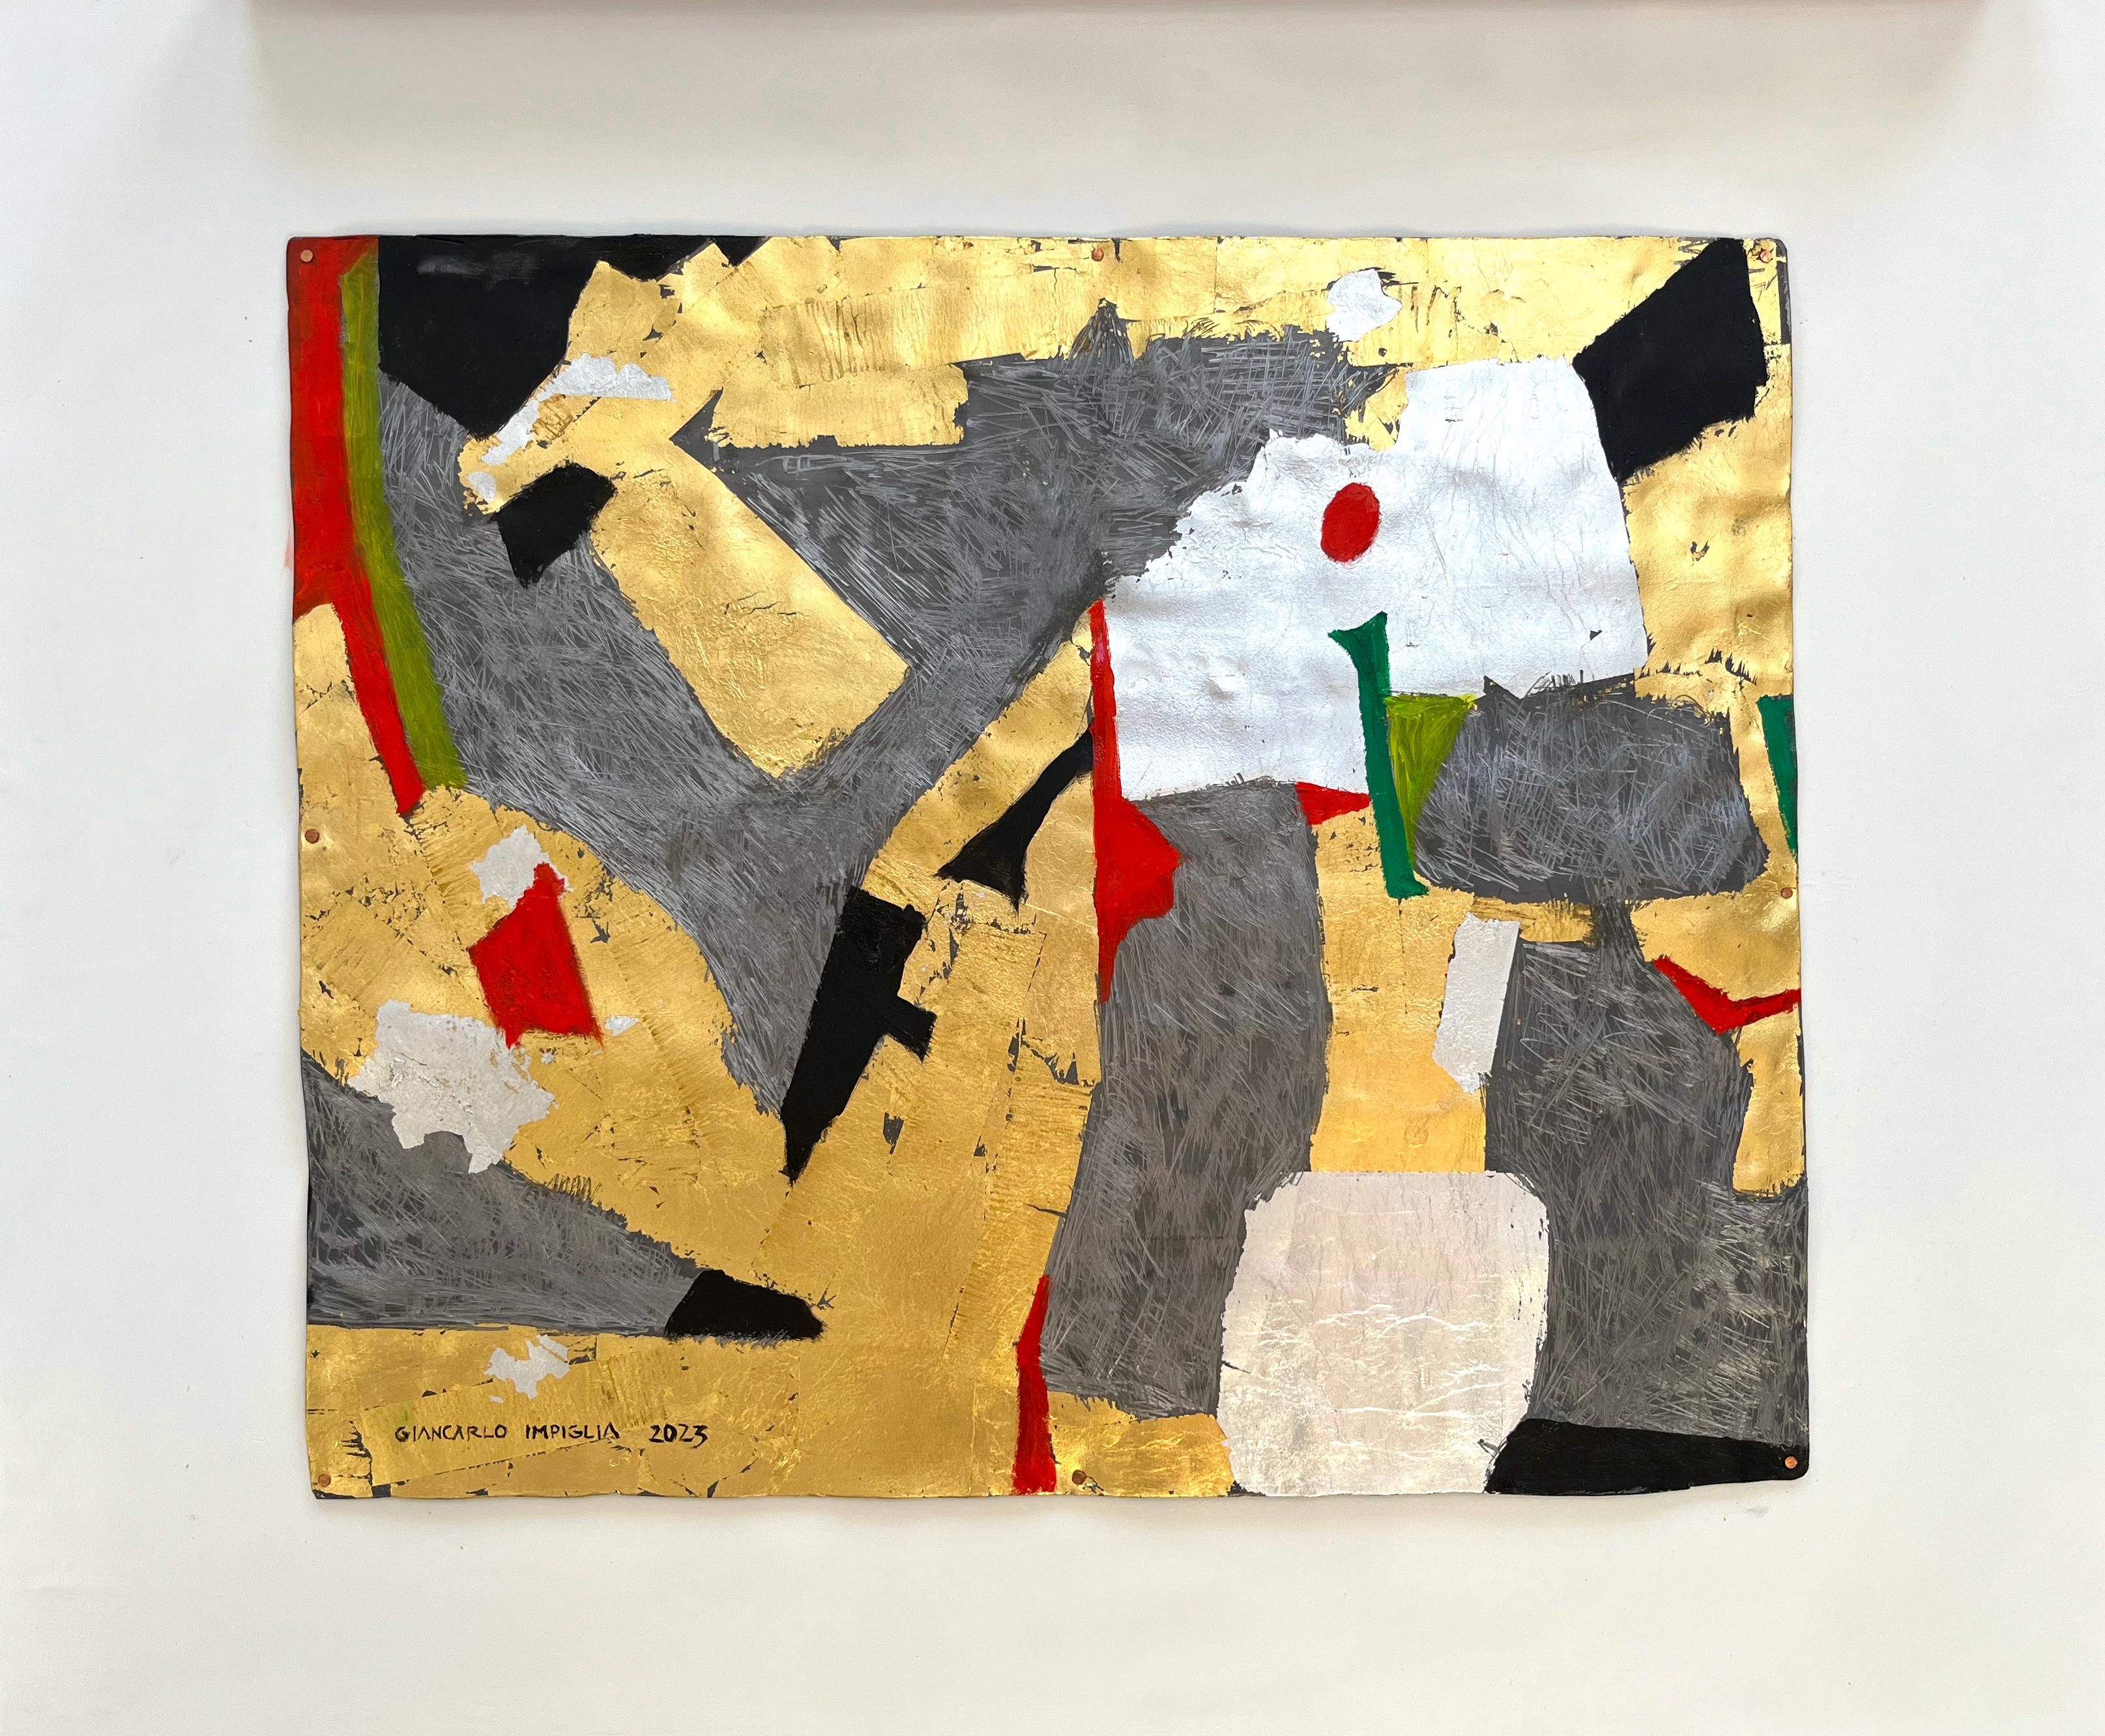 Abstract Painting Giancarlo Impiglia - Œuvre abstraite rare « Or, argent et plomb 1 » d' Impiglia